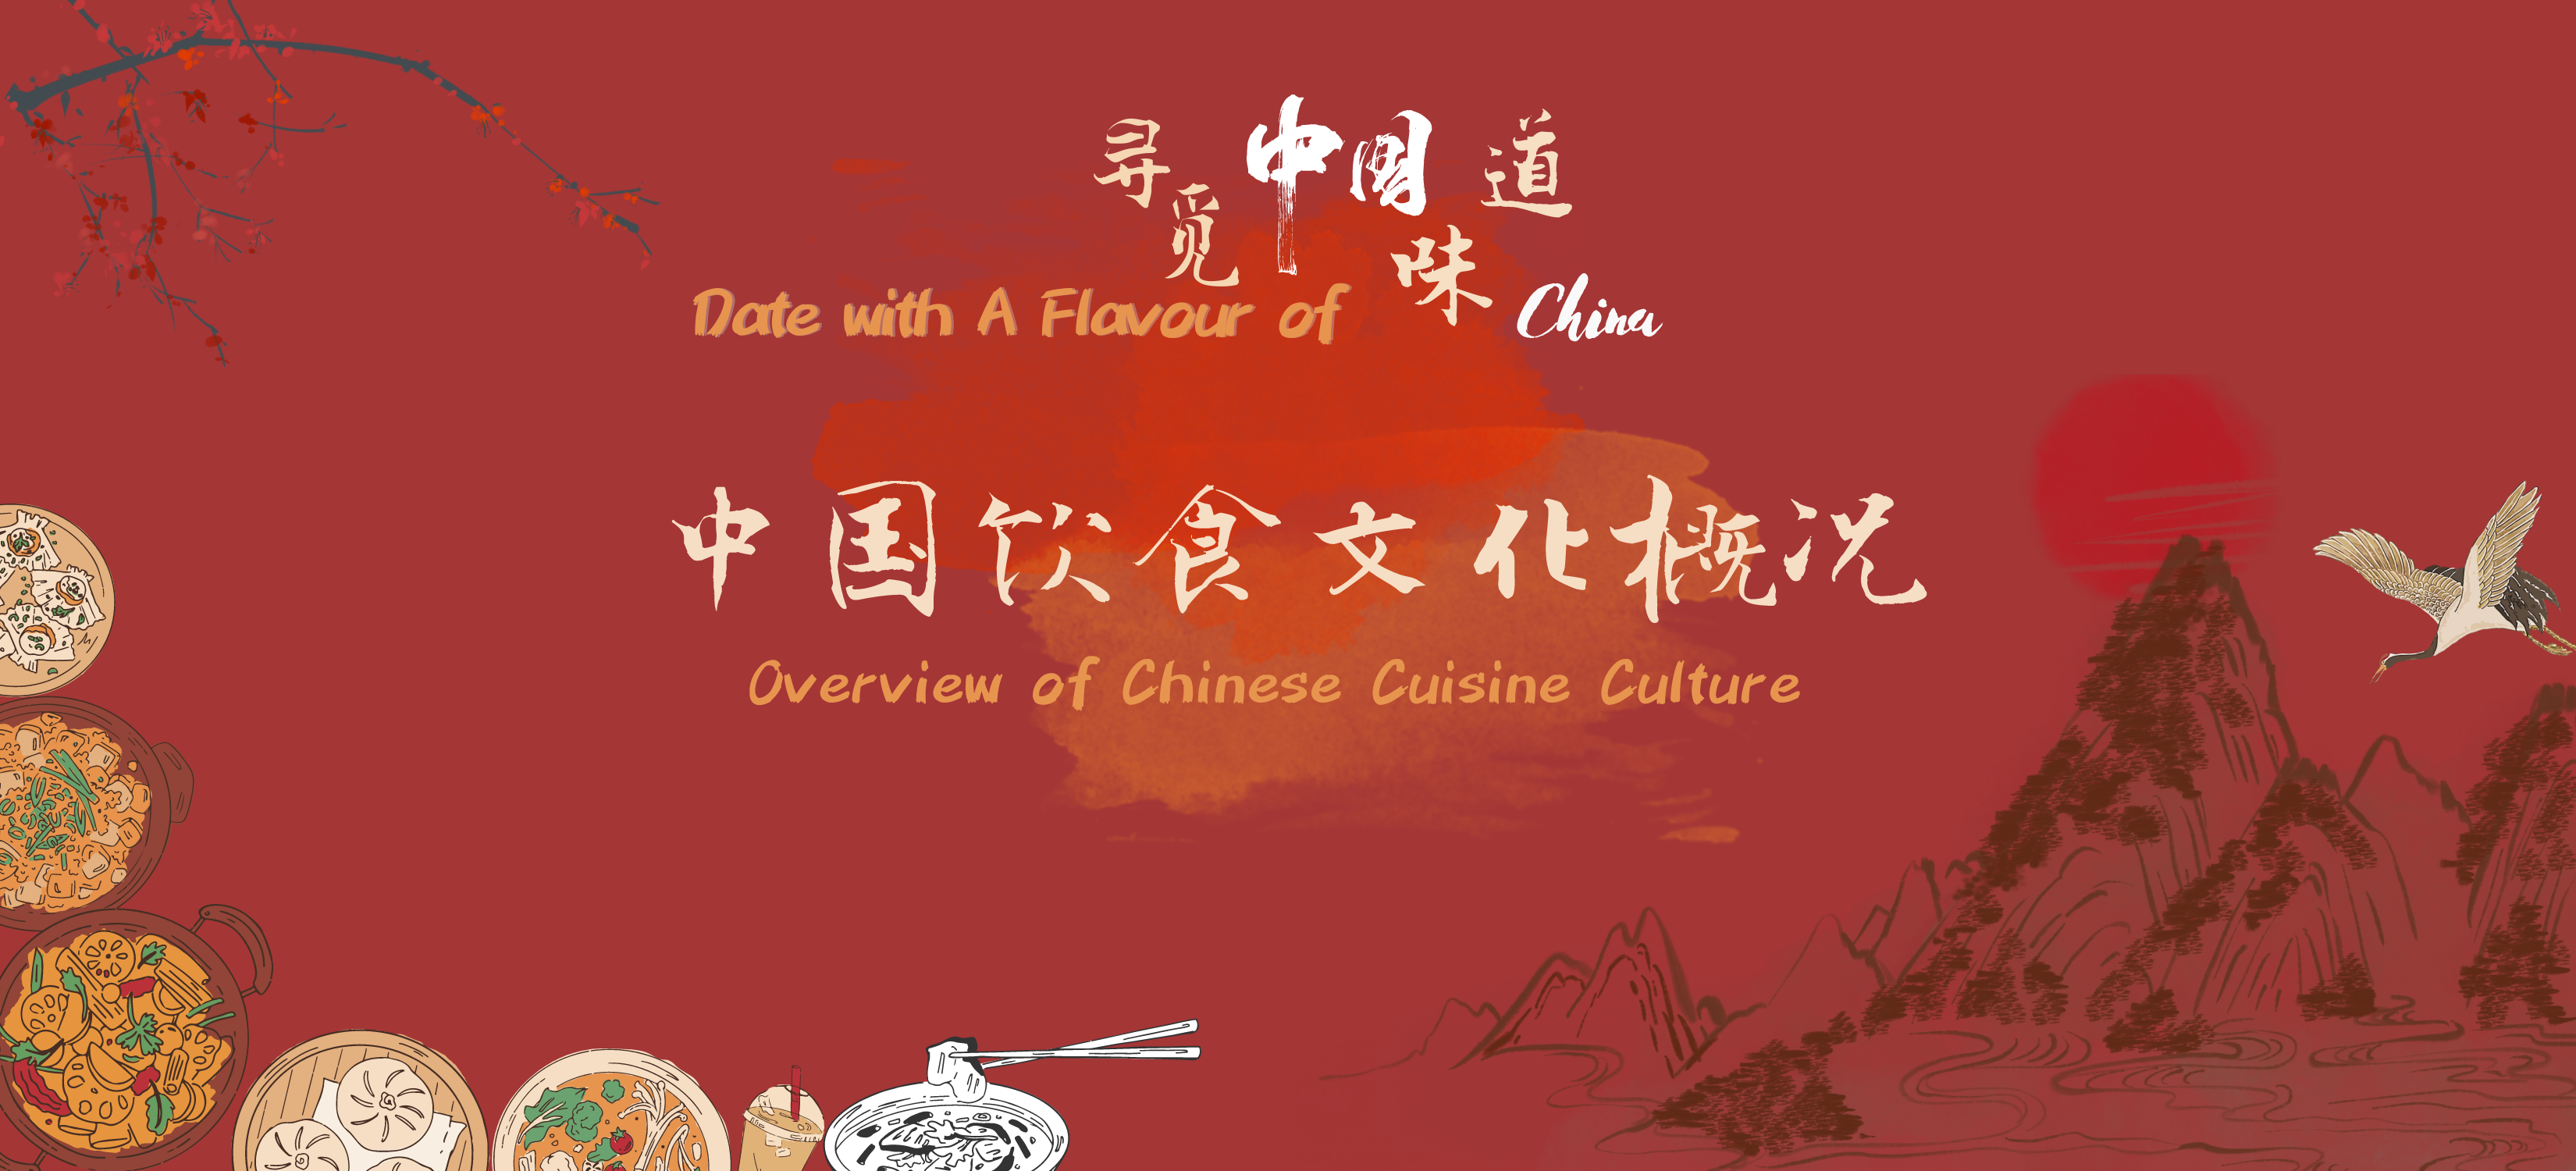 Overview of Chinese Cuisine